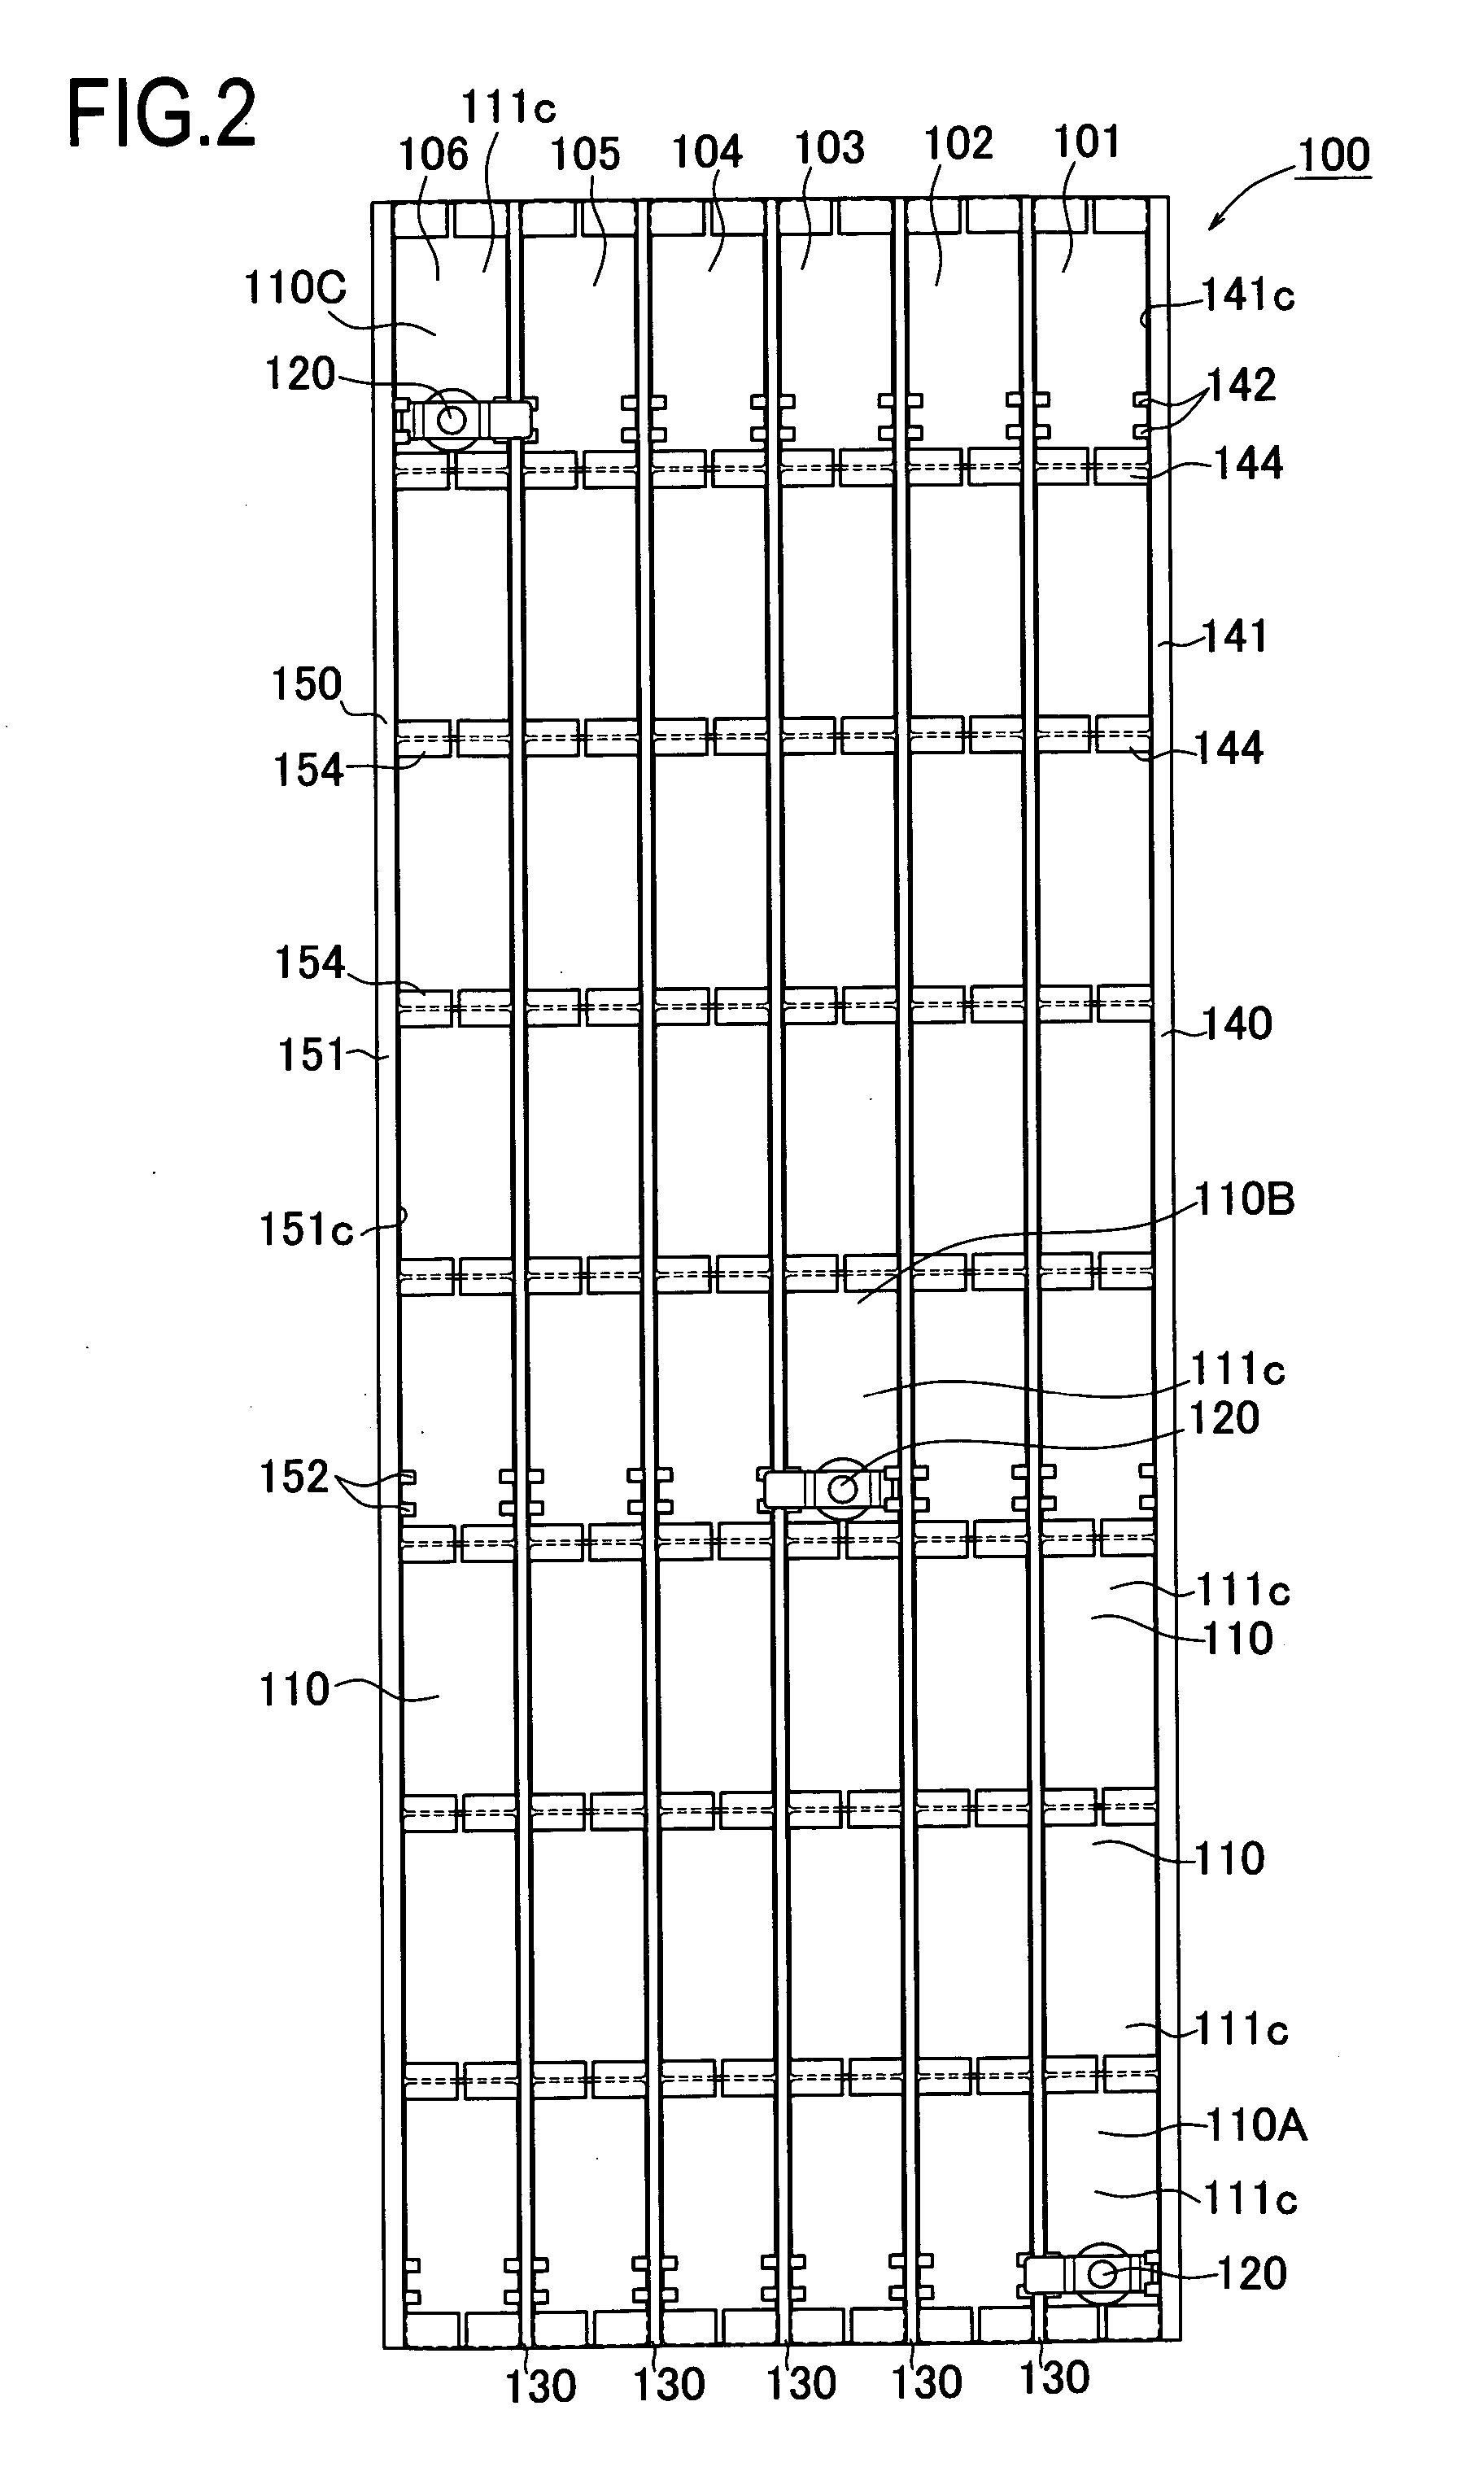 Secondary battery structure